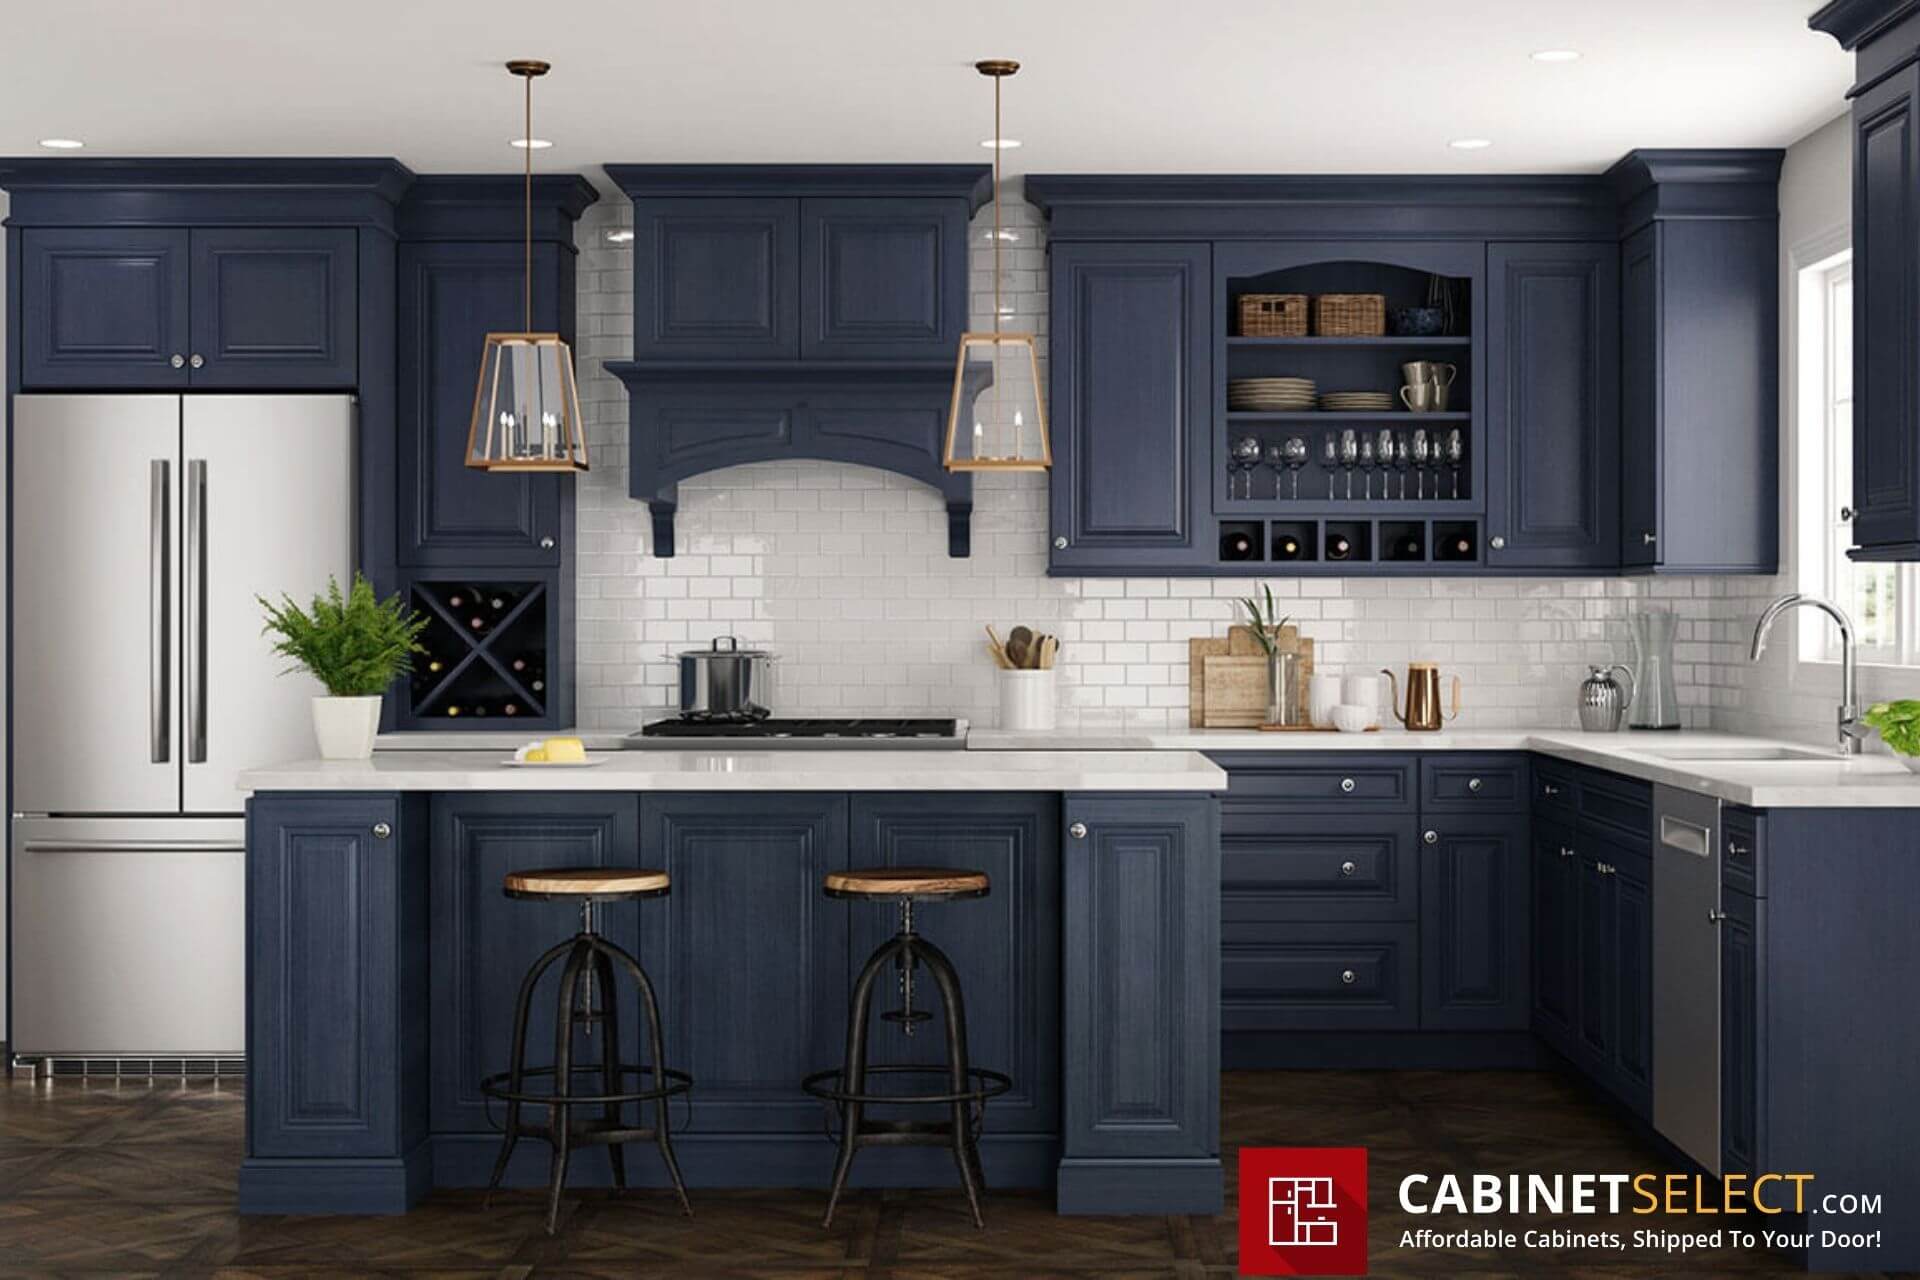 https://cabinetselect.com/cswp/wp-content/uploads/2021/07/Feature-Image-Kitchen-Cabinet-Colors-1.jpg